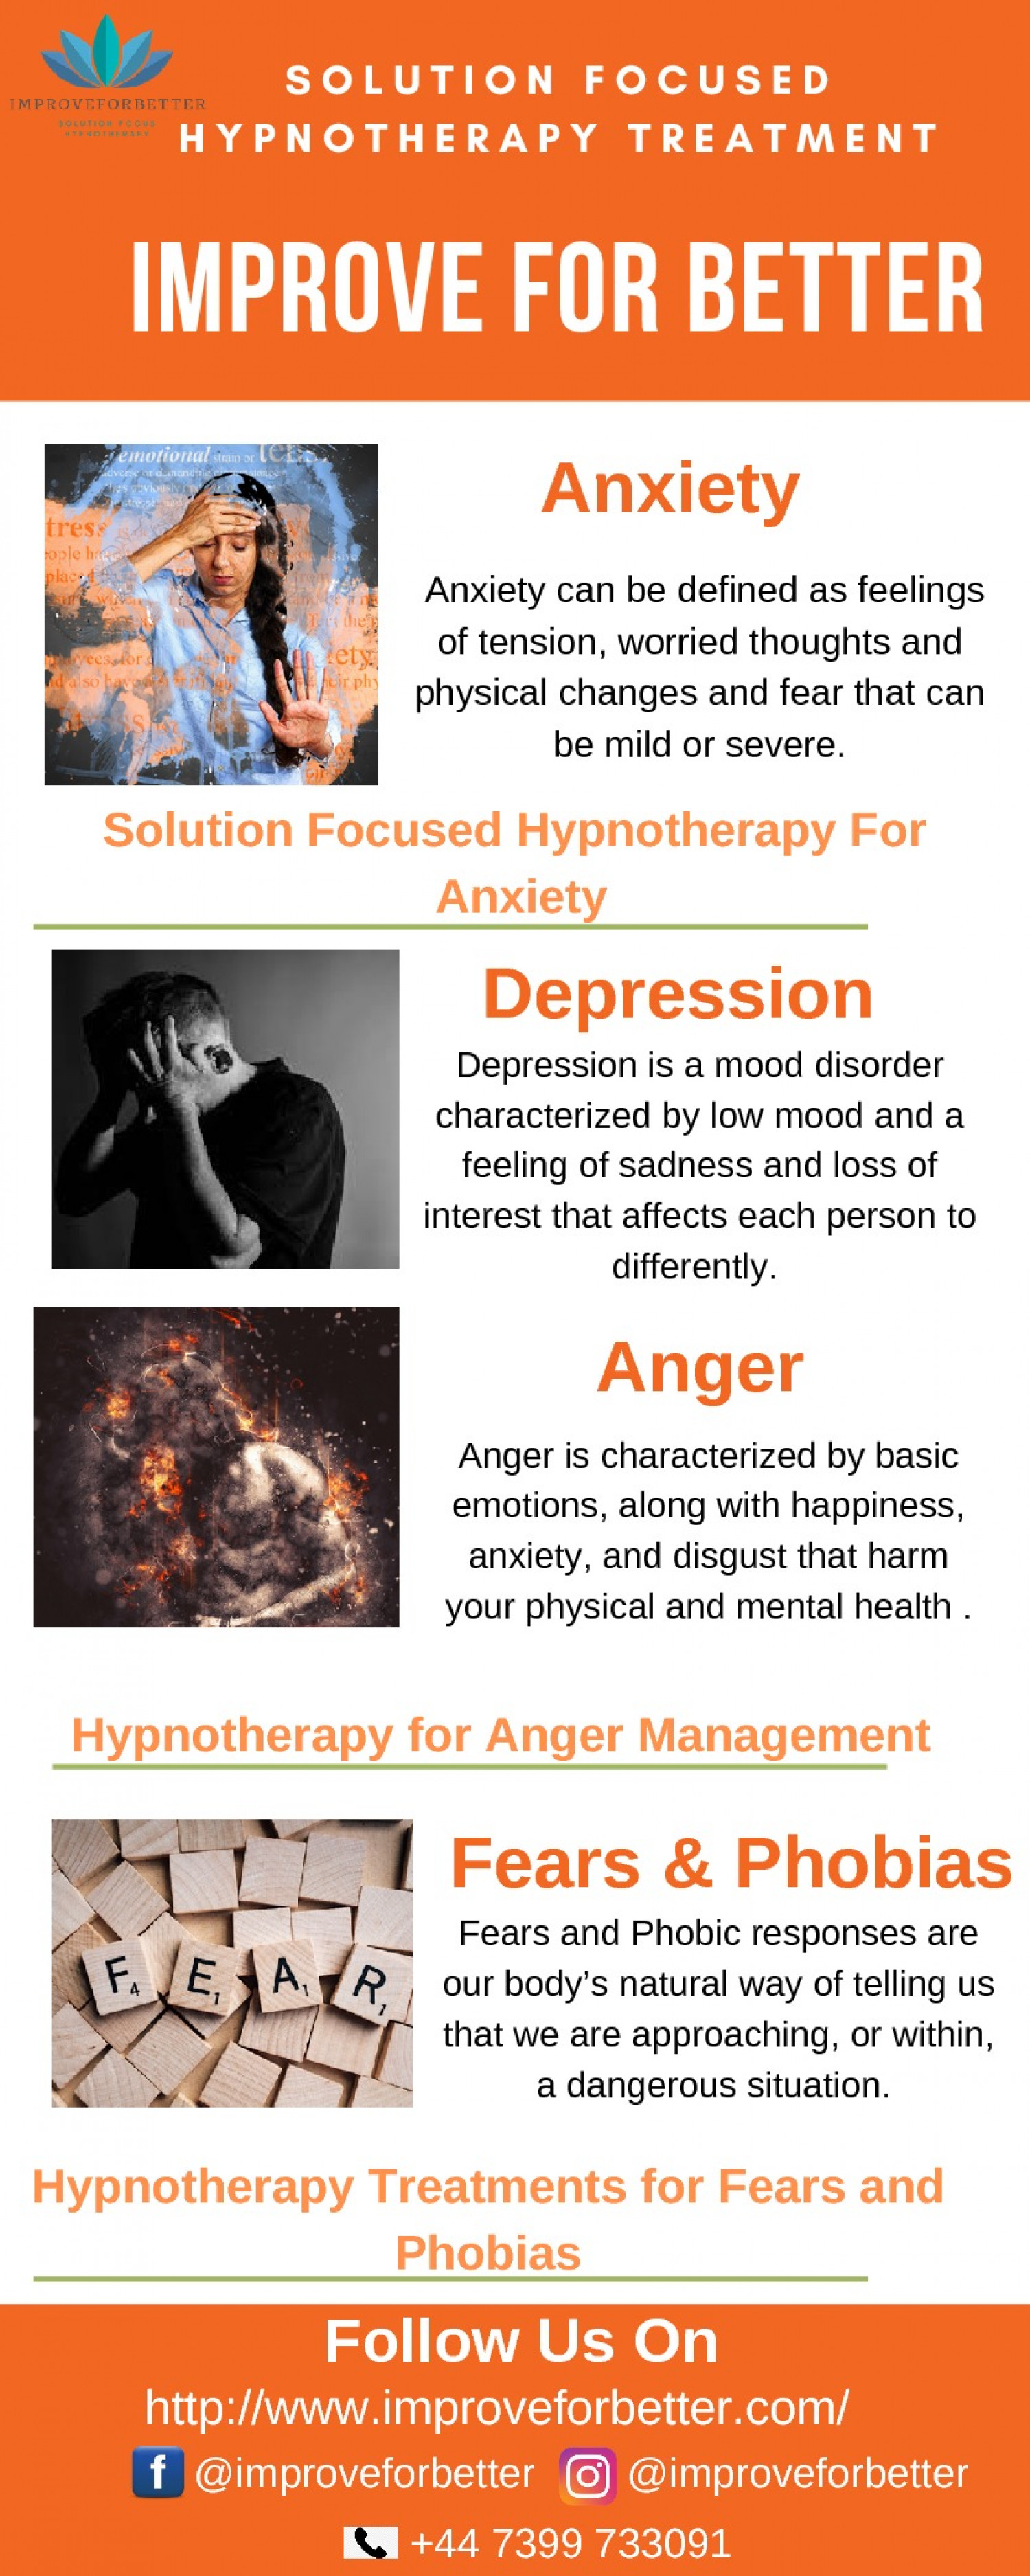 Hypnotherapy Treatments for Fears and Phobias - Improve For Better Infographic